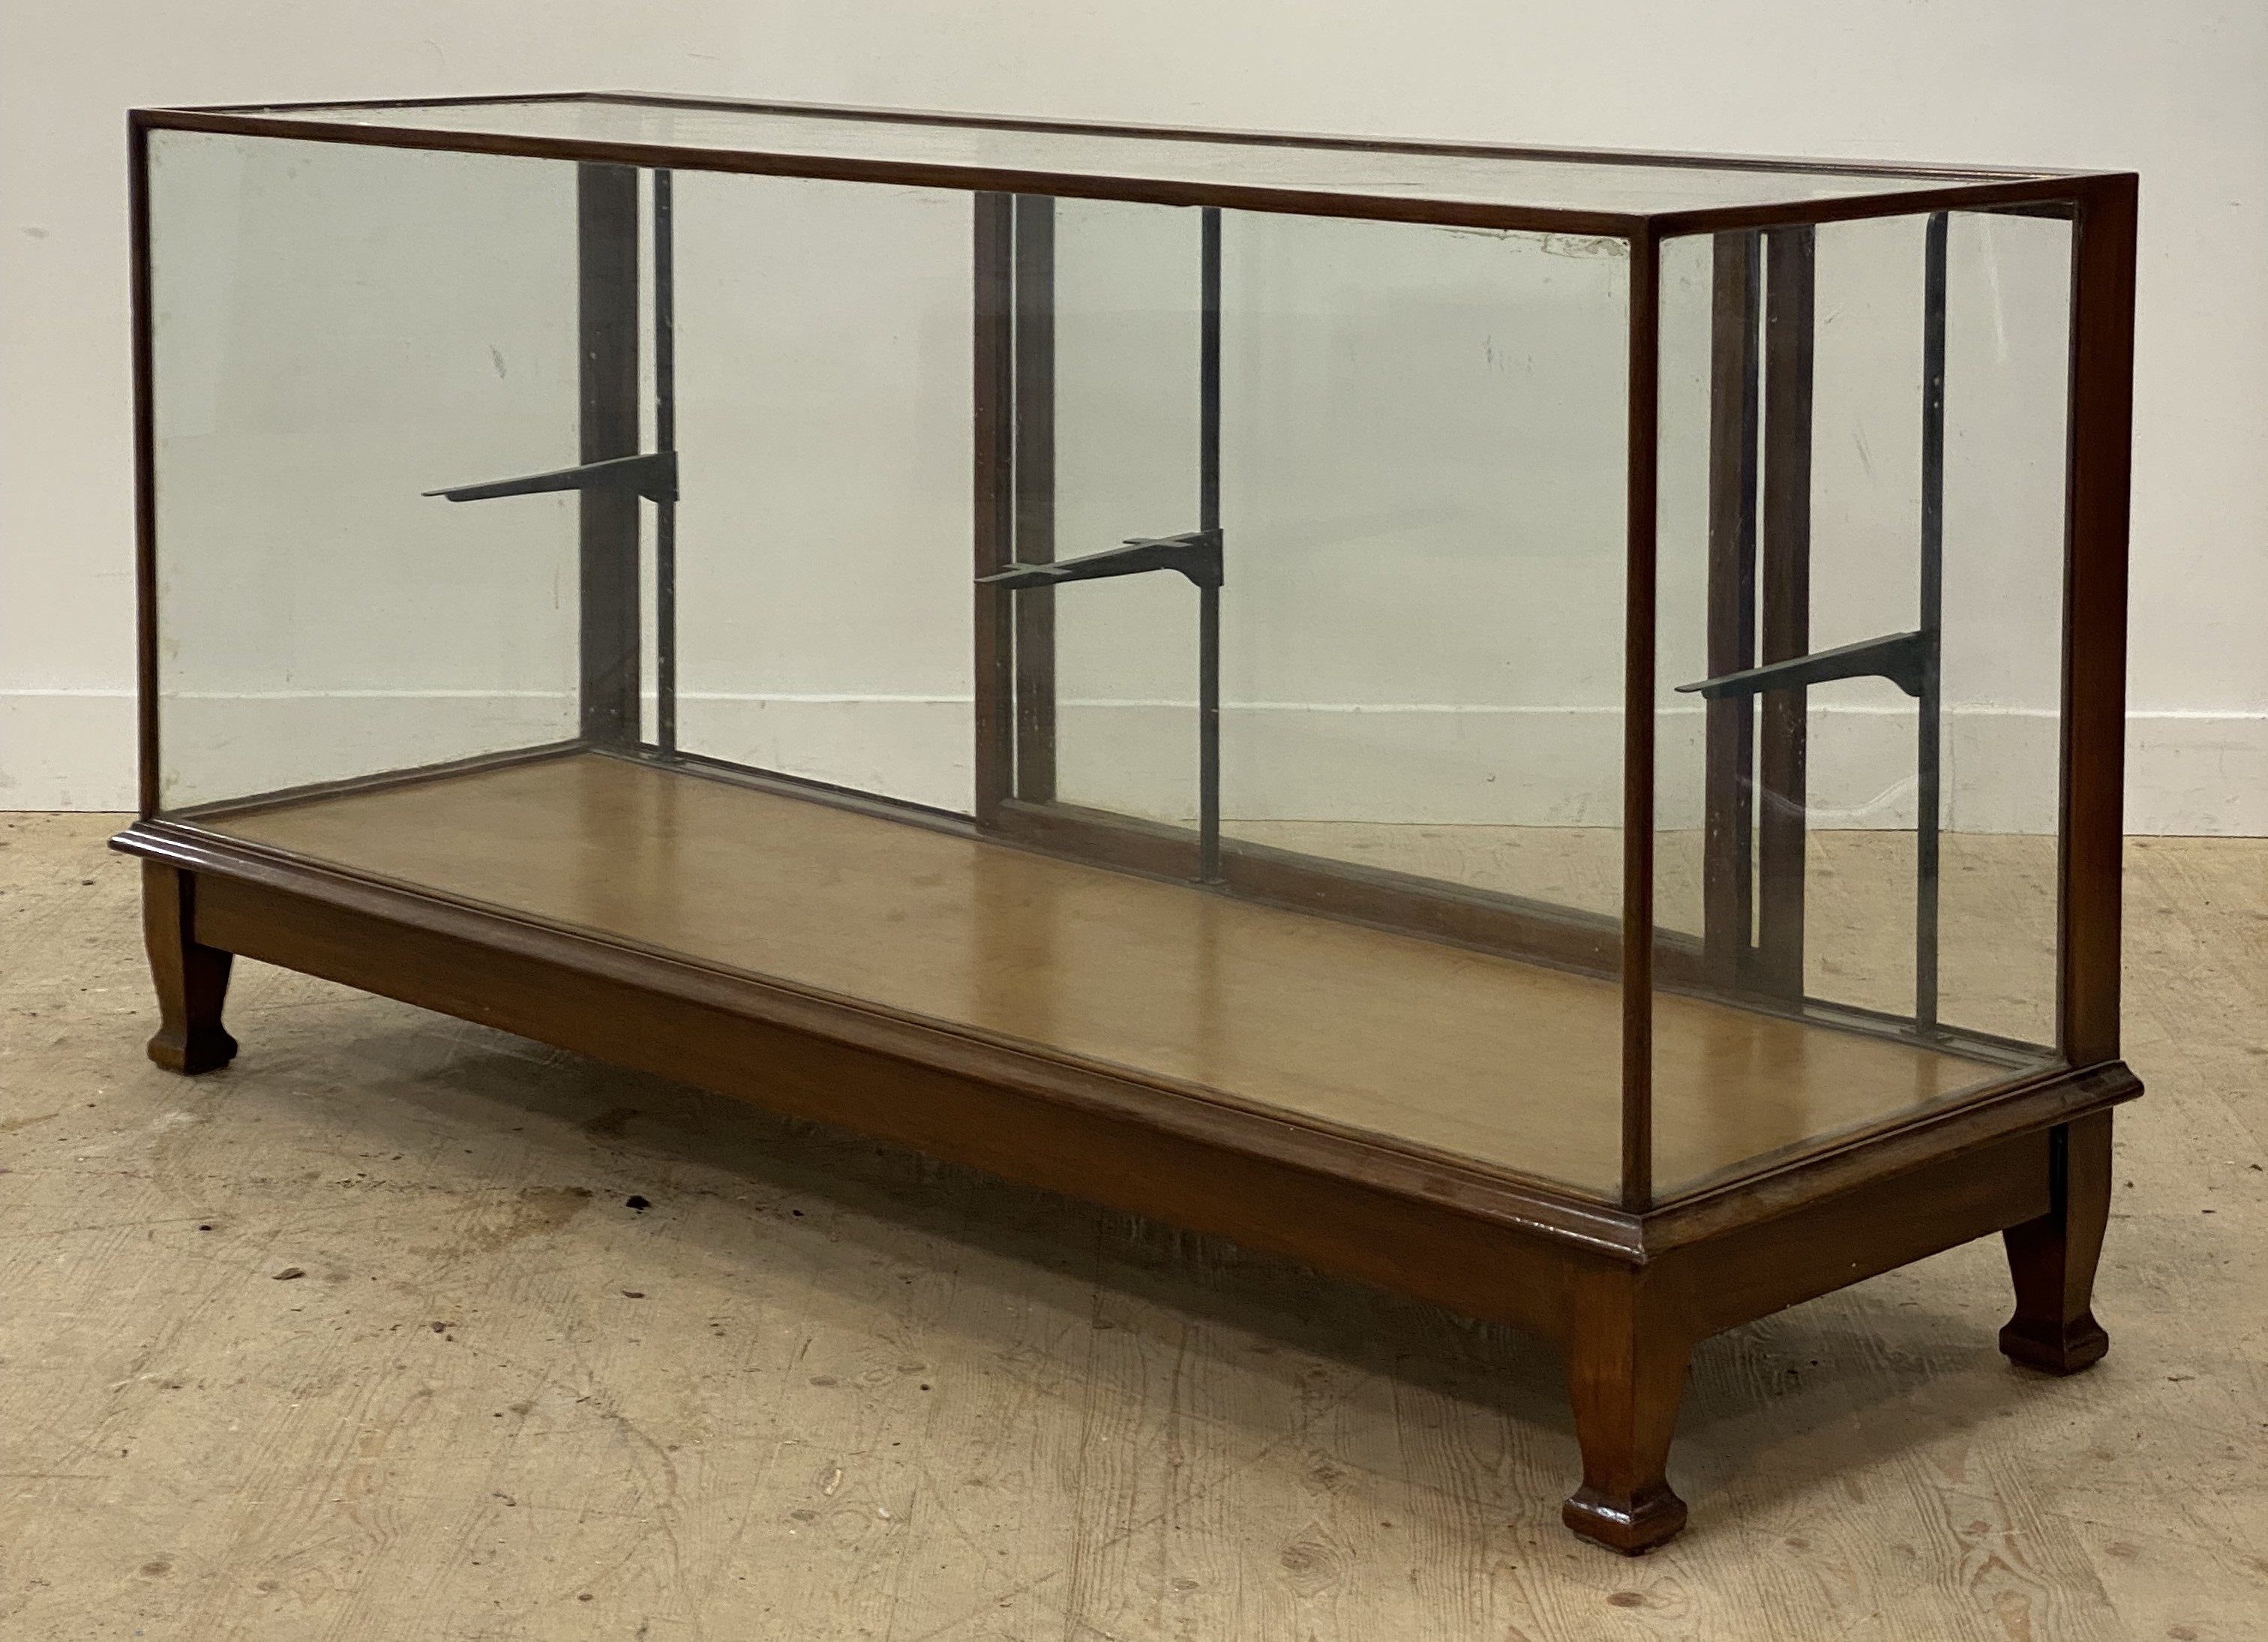 An early 20th century walnut framed shops / haberdashers counter, glazed all round and with